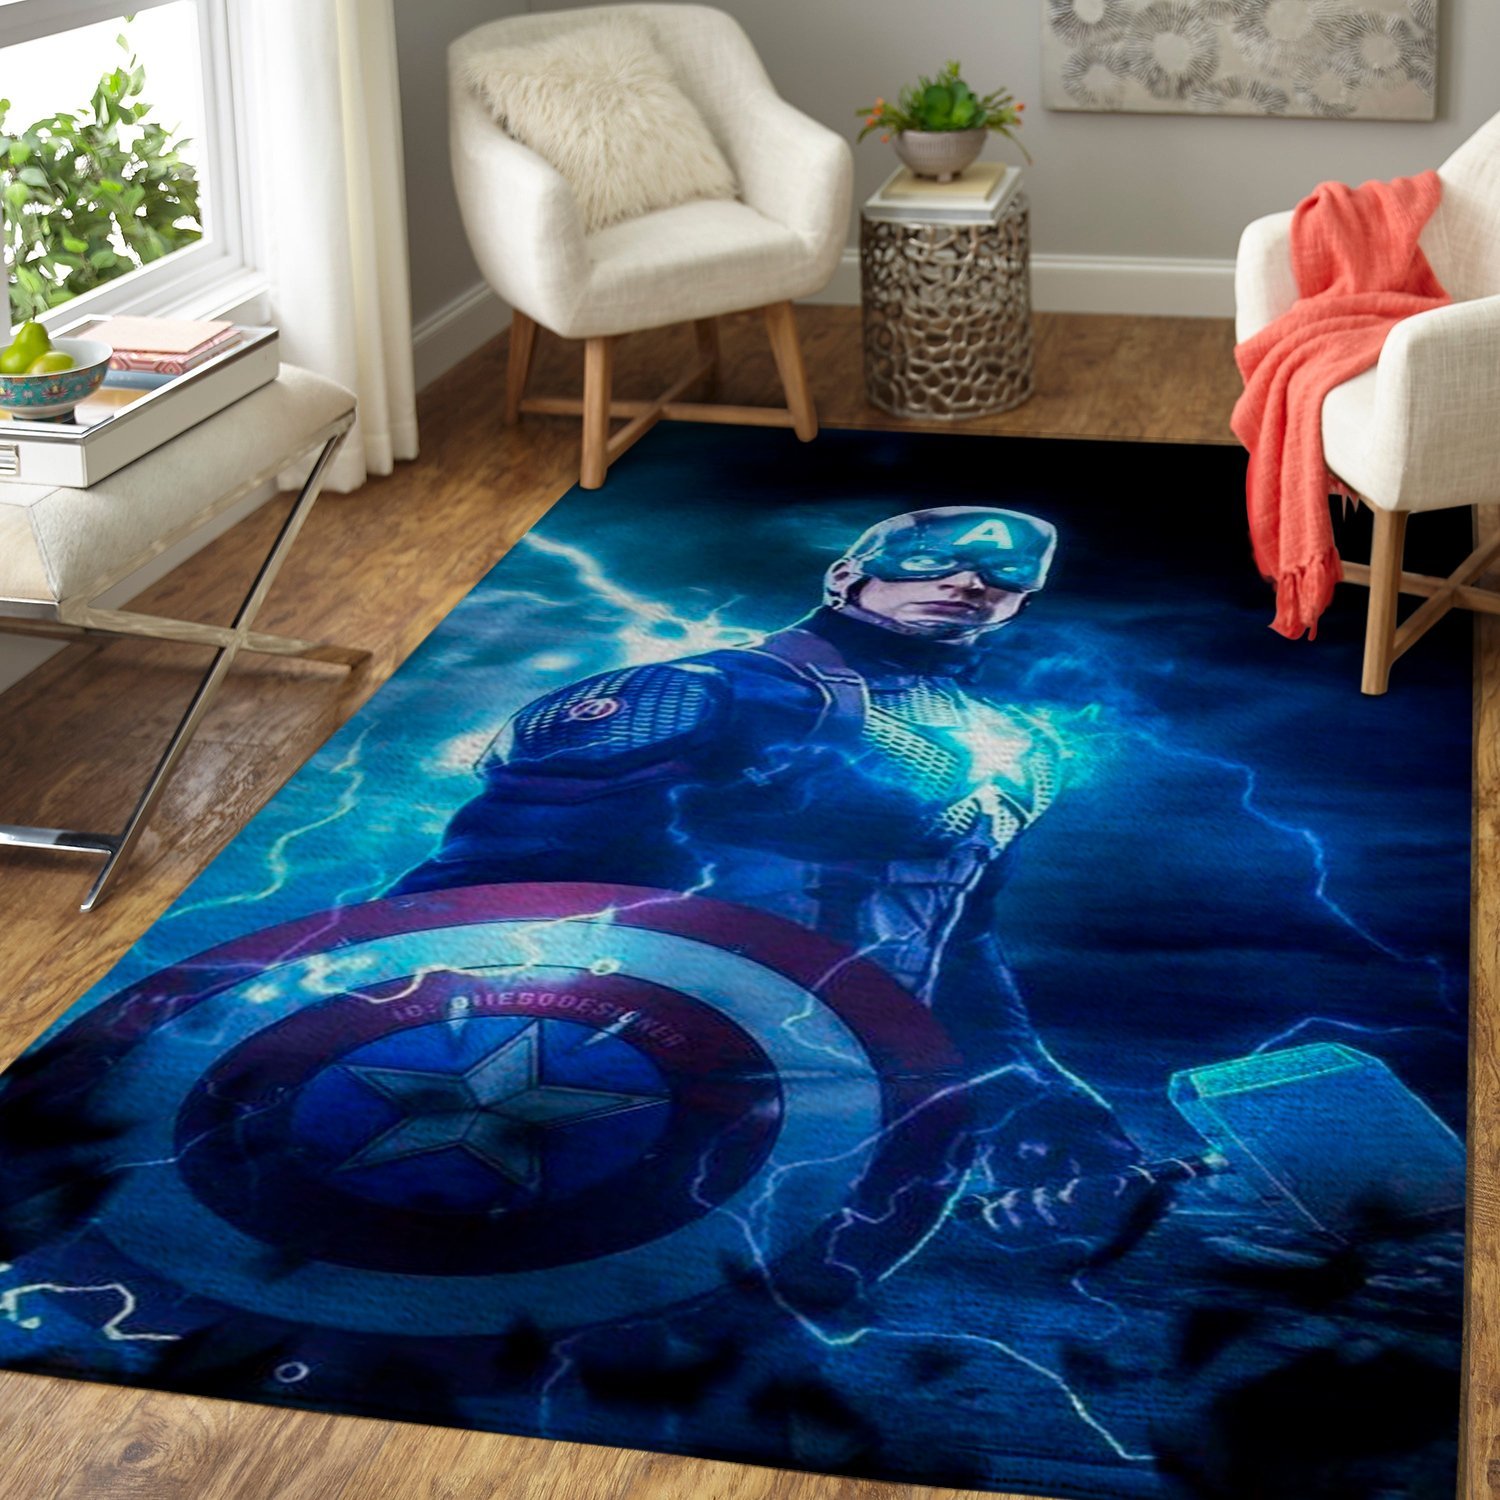 CAPTAIN AMERICA AREA LIMITED EDITION RUG ? CUSTOM SIZE AND PRINTING